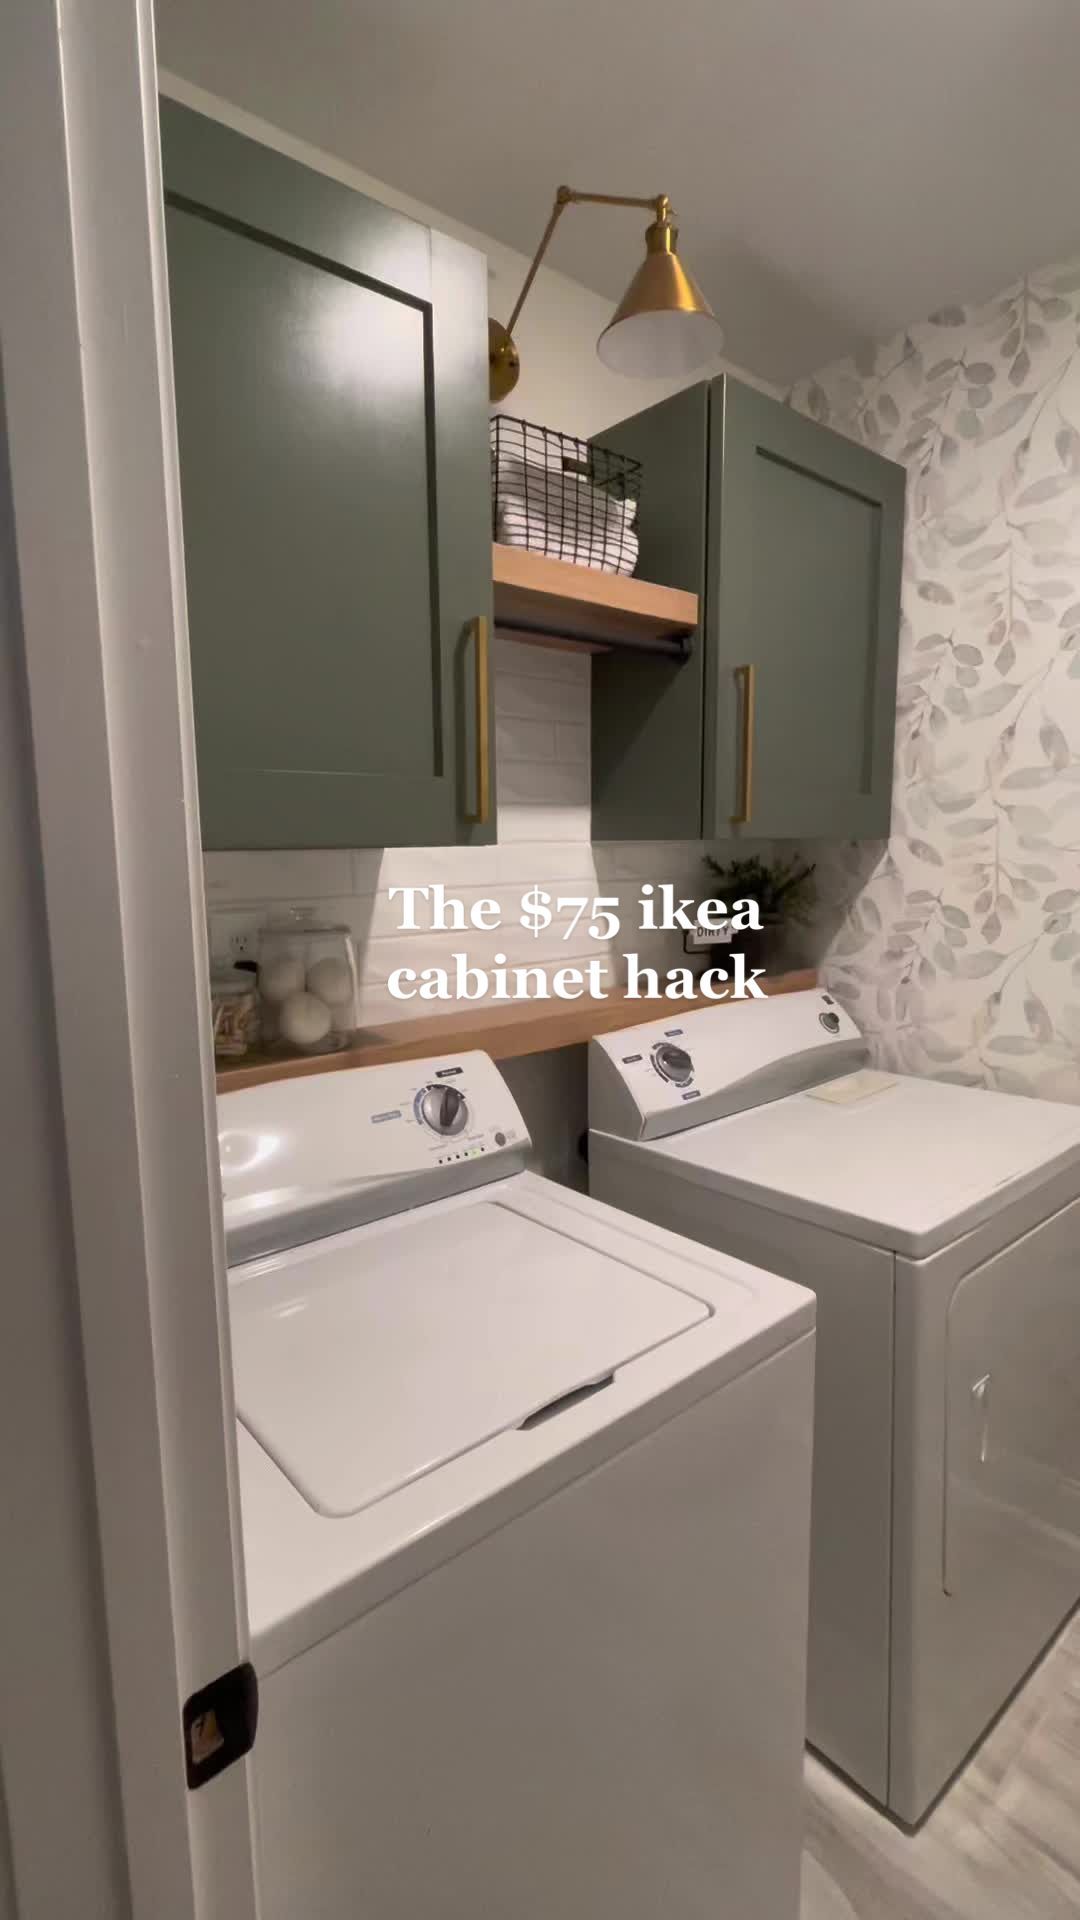 Cabinets for the laundry room